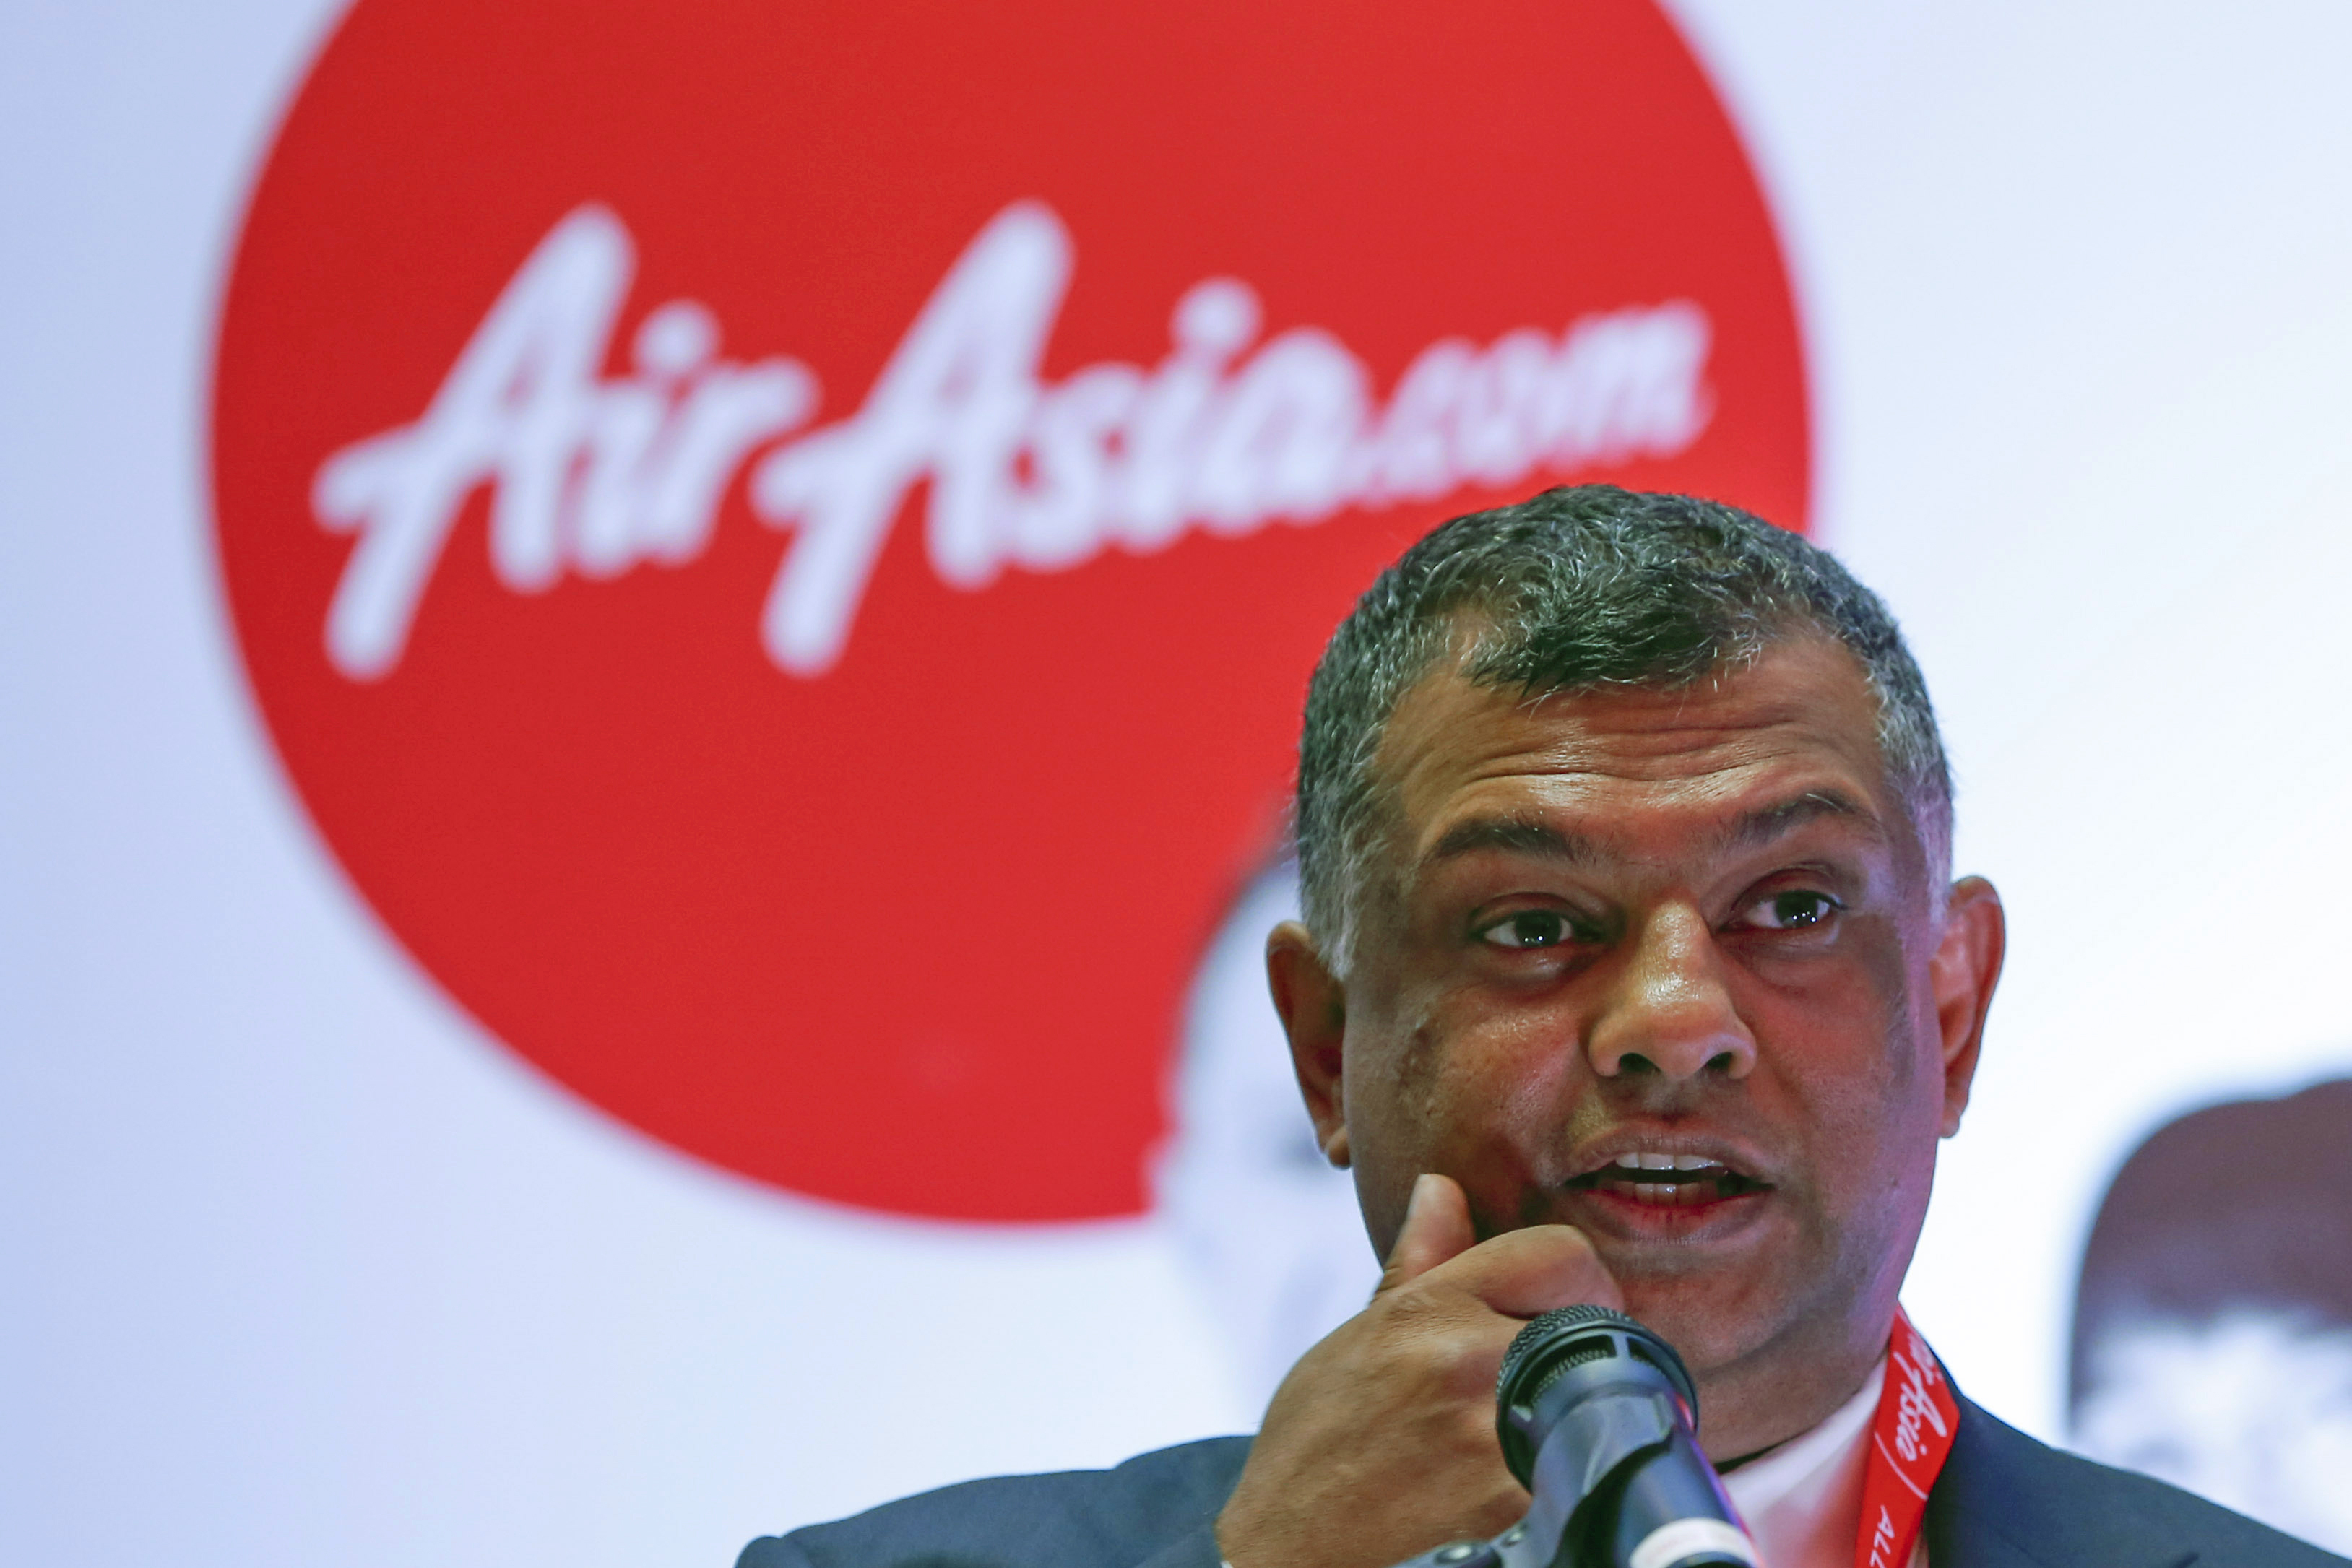 FILE - In an Aug. 11, 2014 file photo, AirAsia Group Chief Executive Officer Tony Fernandes speaks during a press conference in Kuala Lumpur, Malaysia. Fernandes is more than just the CEO of AirAsia: He's the brash personality and cheerleader-like figure who gives the discount carrier its soul. A flamboyant executive who loves race cars and soccer - and is known for speaking his mind, sometimes inappropriately - Fernandes has opened air travel to millions who previously couldnt afford it.  Now, with one of his planes and 162 people onboard missing, Fernandes faces what he's calling his worst nightmare.  (AP Photo/Vincent Thian, File)